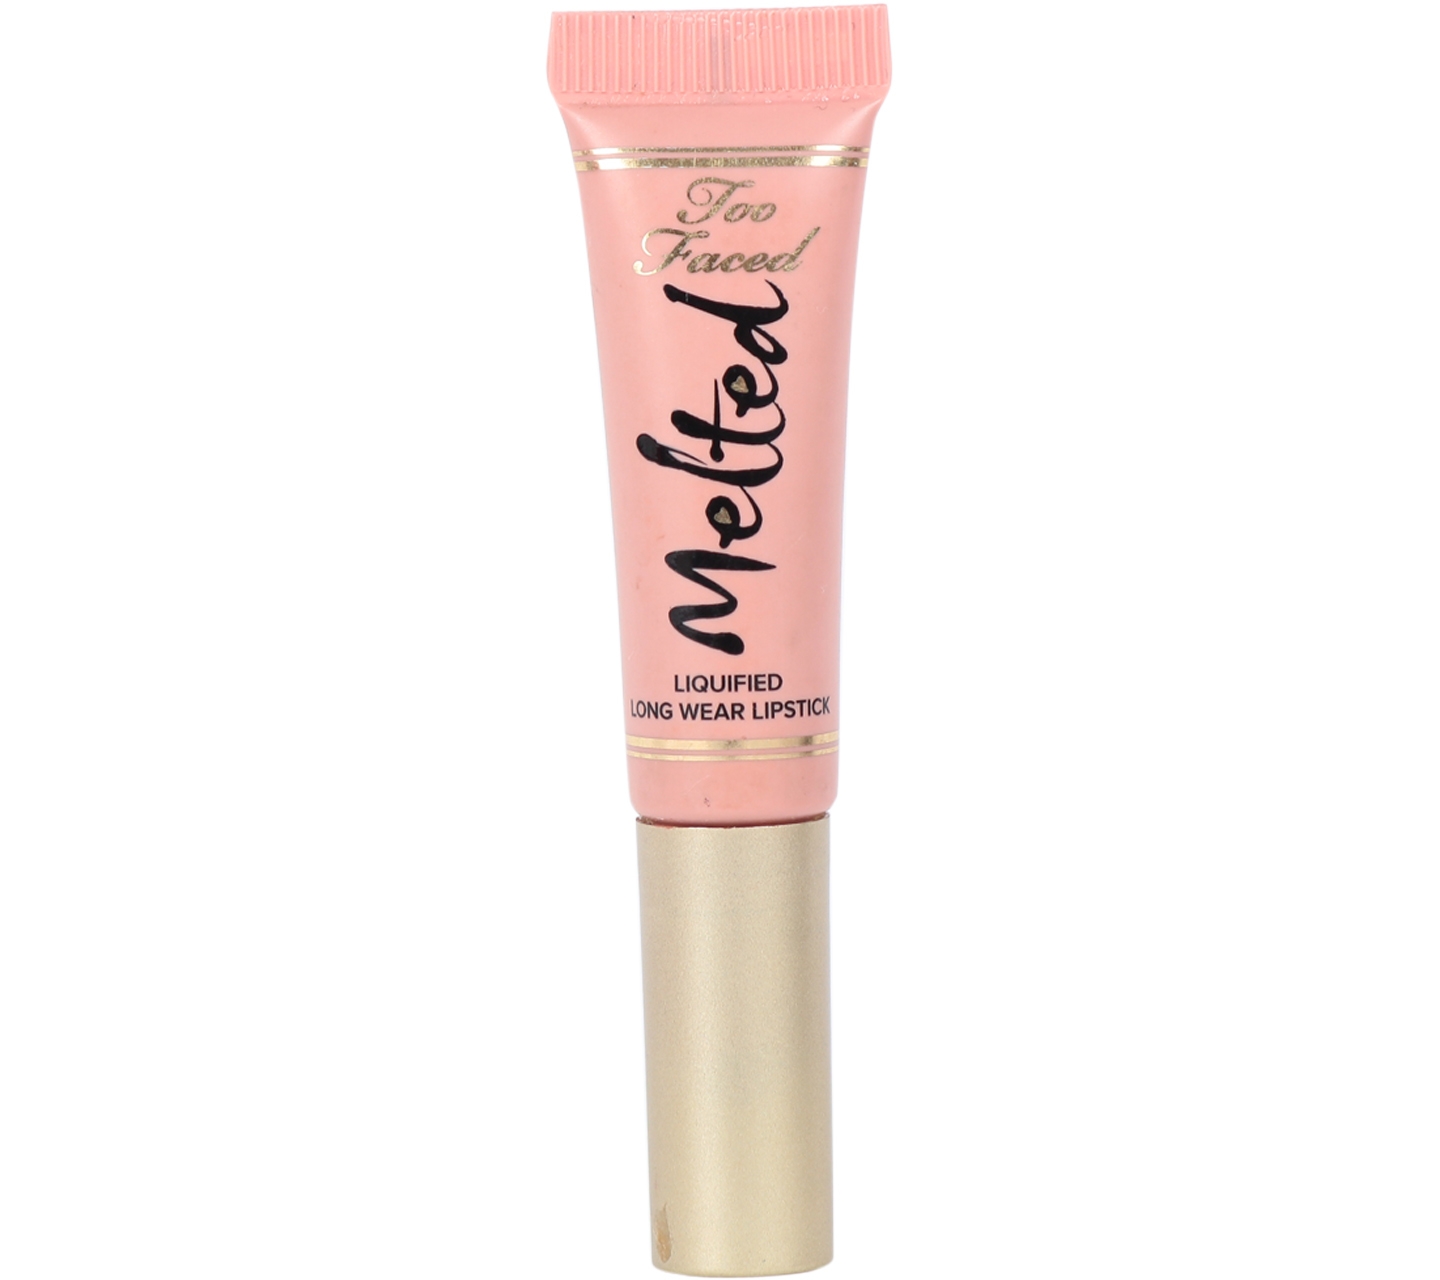 Too Faced Melted Nude Liquified Long Wear Lipstick Lips